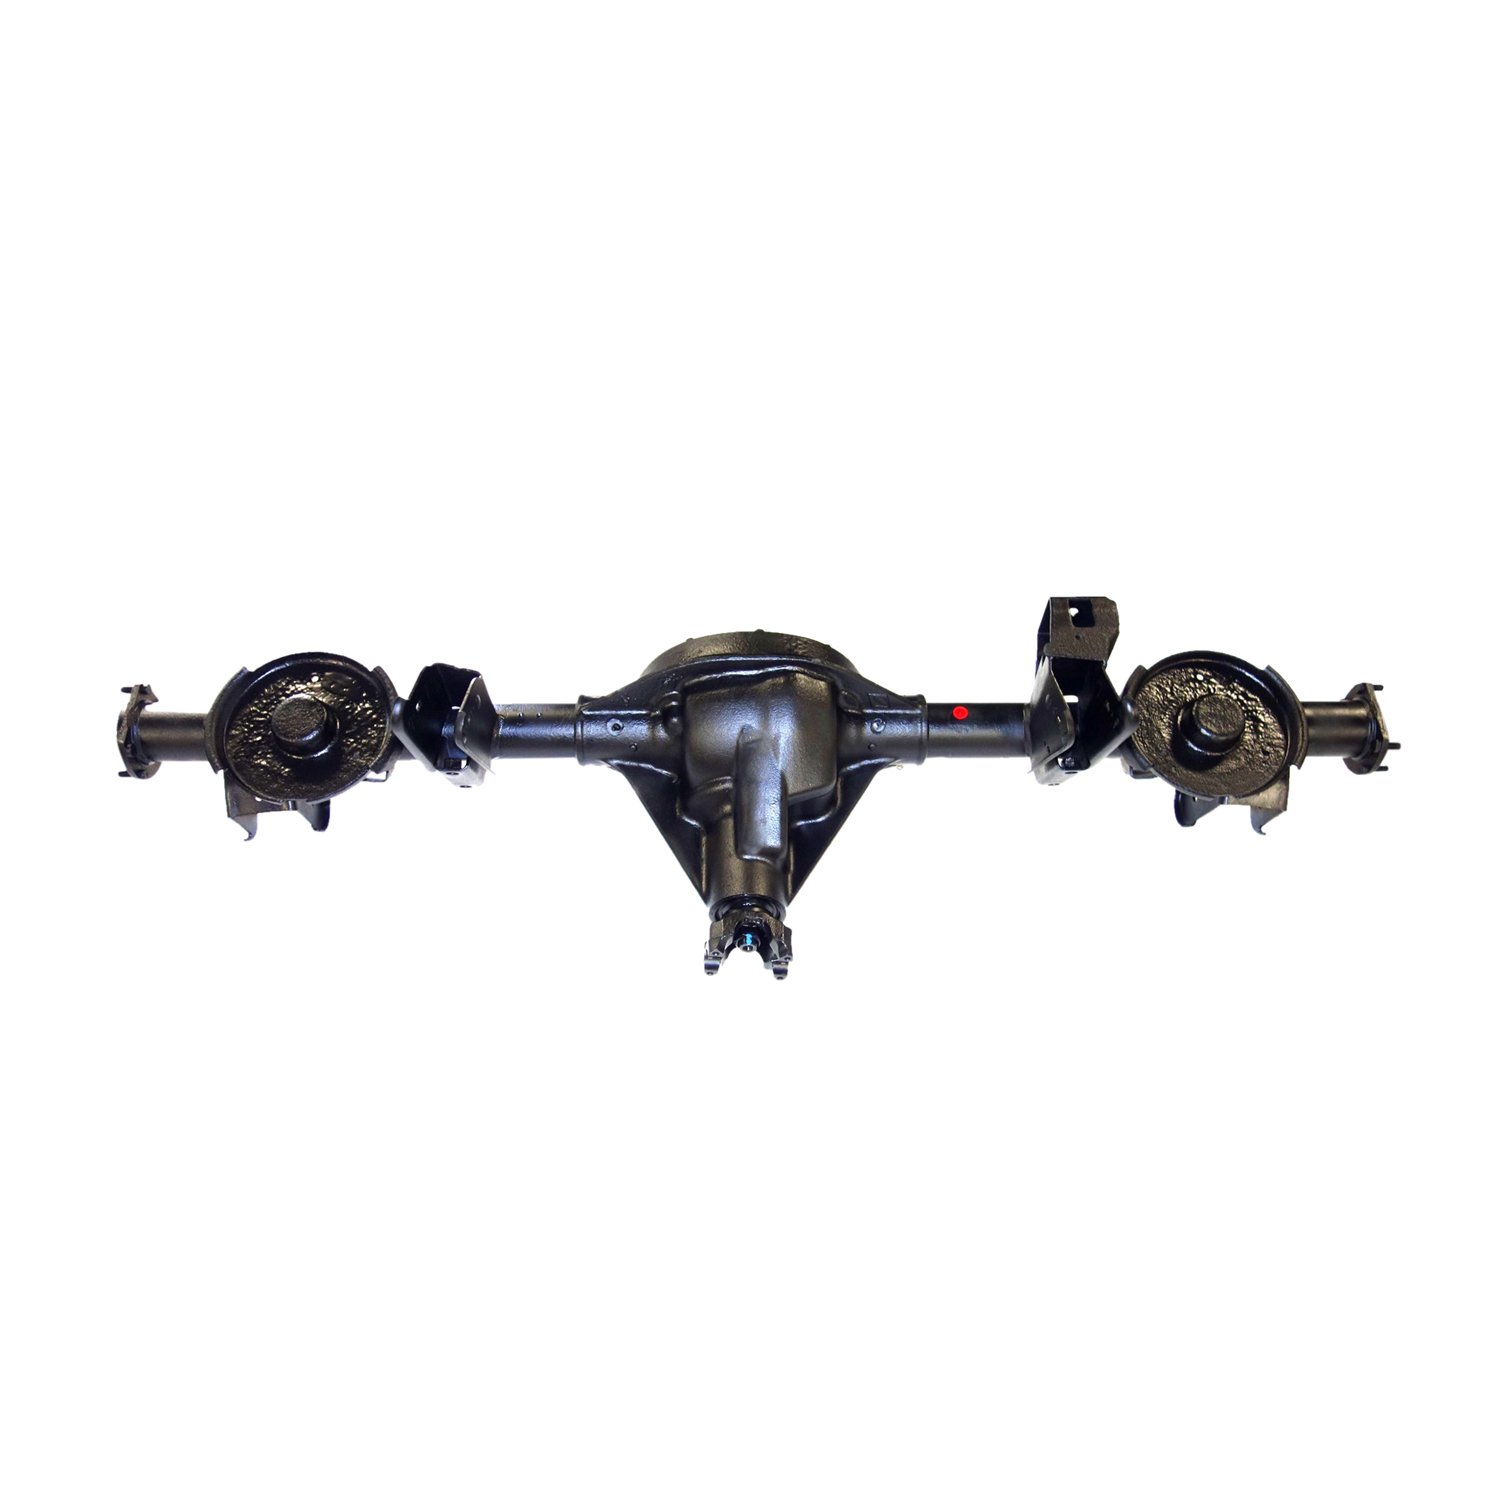 Remanufactured Complete Axle Assembly for Dana 35 97-02 Wrangler 3.73 w/o ABS, Posi LSD